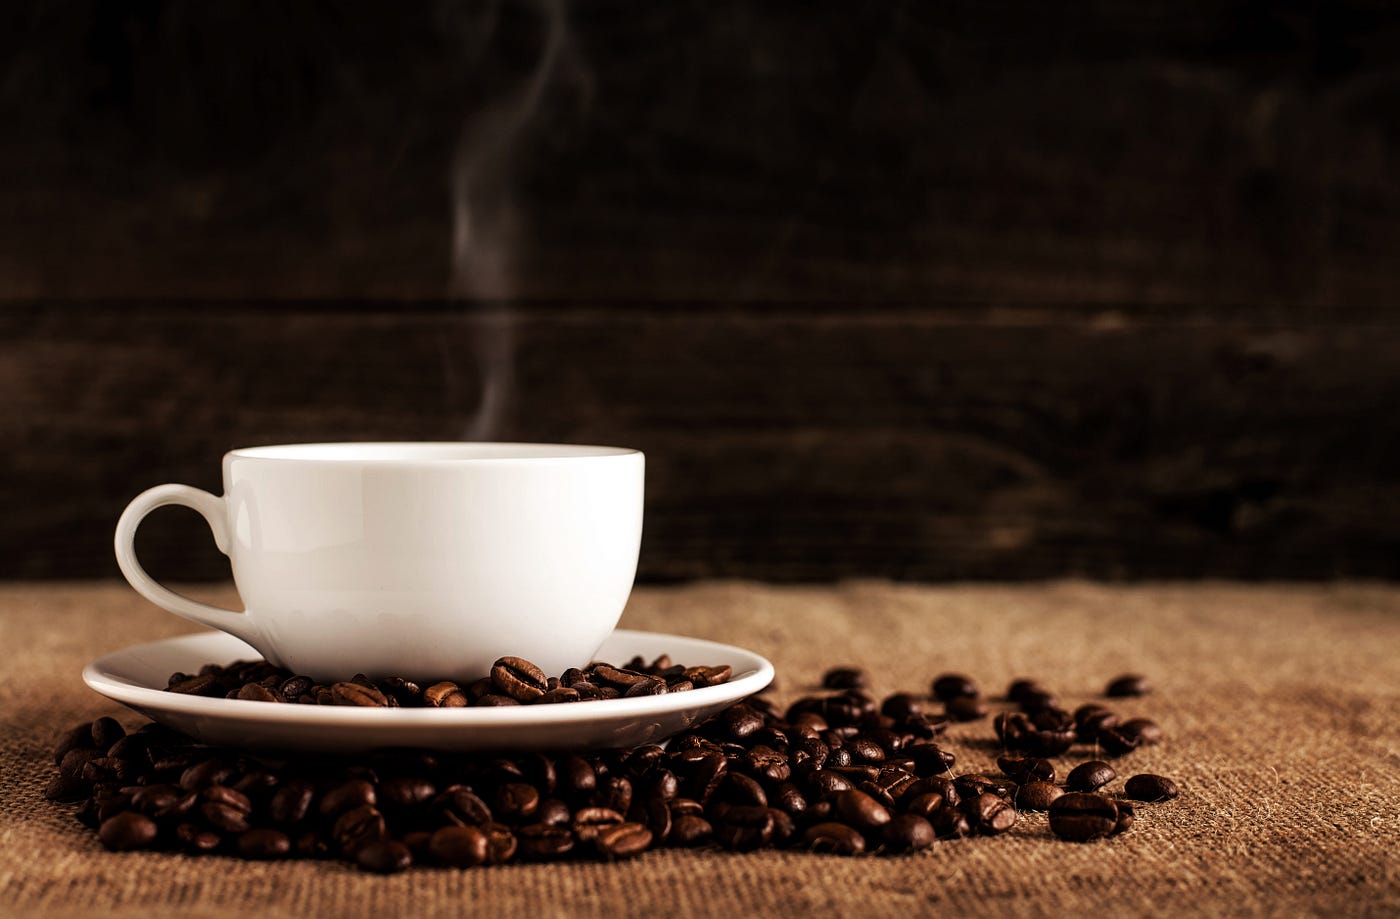 A white cup (with a small curl of steam rising from it) sits on a white saucer, with numerous coffee beans scattered in the saucer and outside of it. A new study suggests that coffee extends life, even if we add sugar.